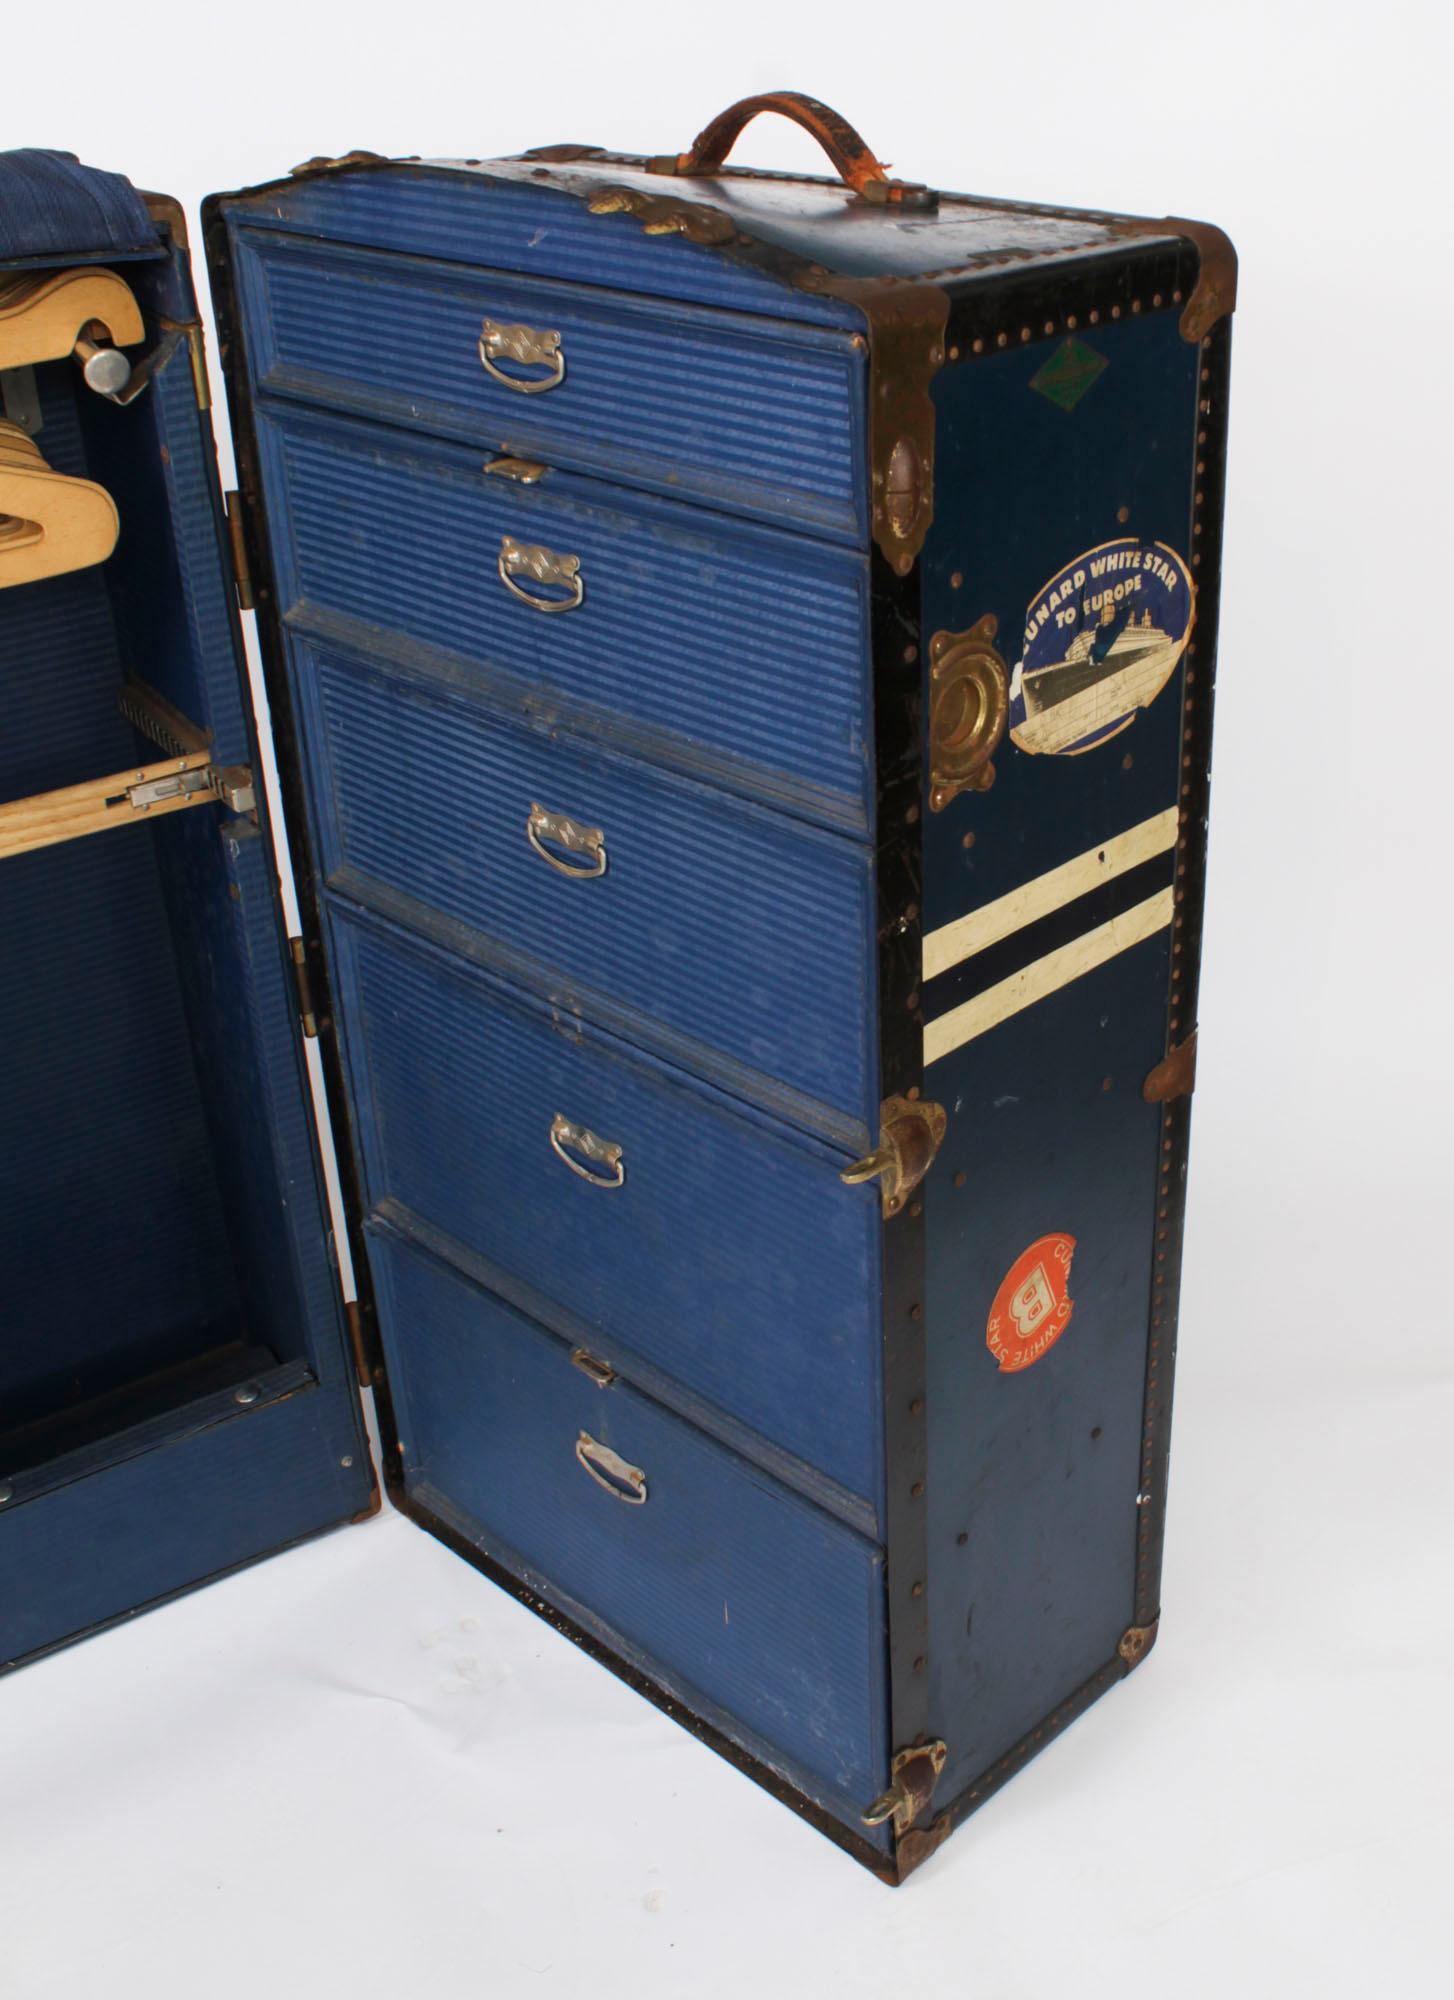 Antique Wardrobe Steamers Trunk Luggage C1930 For Sale 6